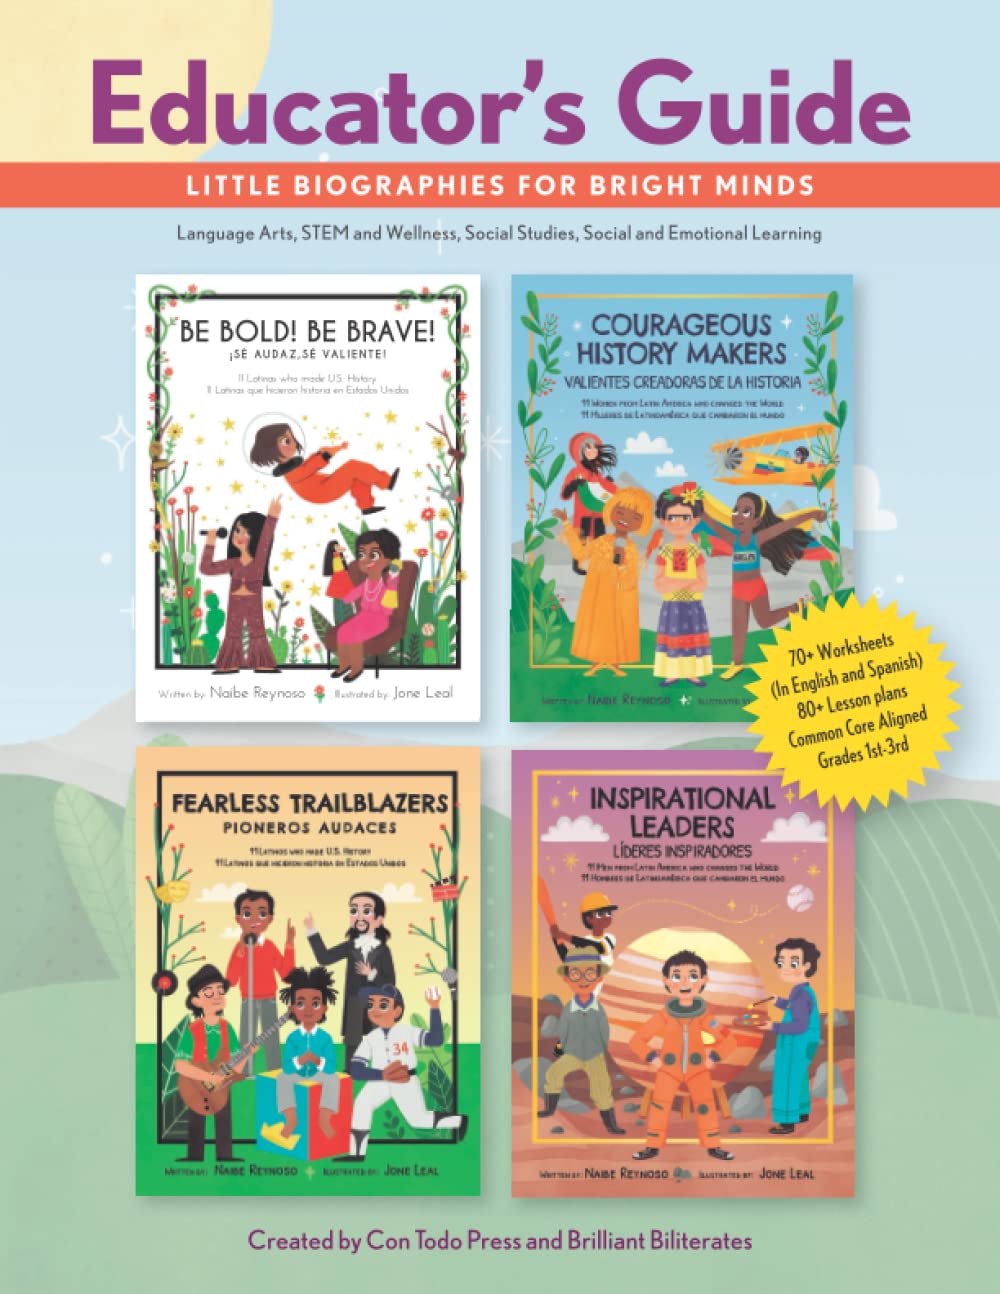 EDUCATOR's GUIDE: Little Biographies for Bright Minds: Language Arts, Stem and Wellness, Social Studies, Social and Emotional Learning